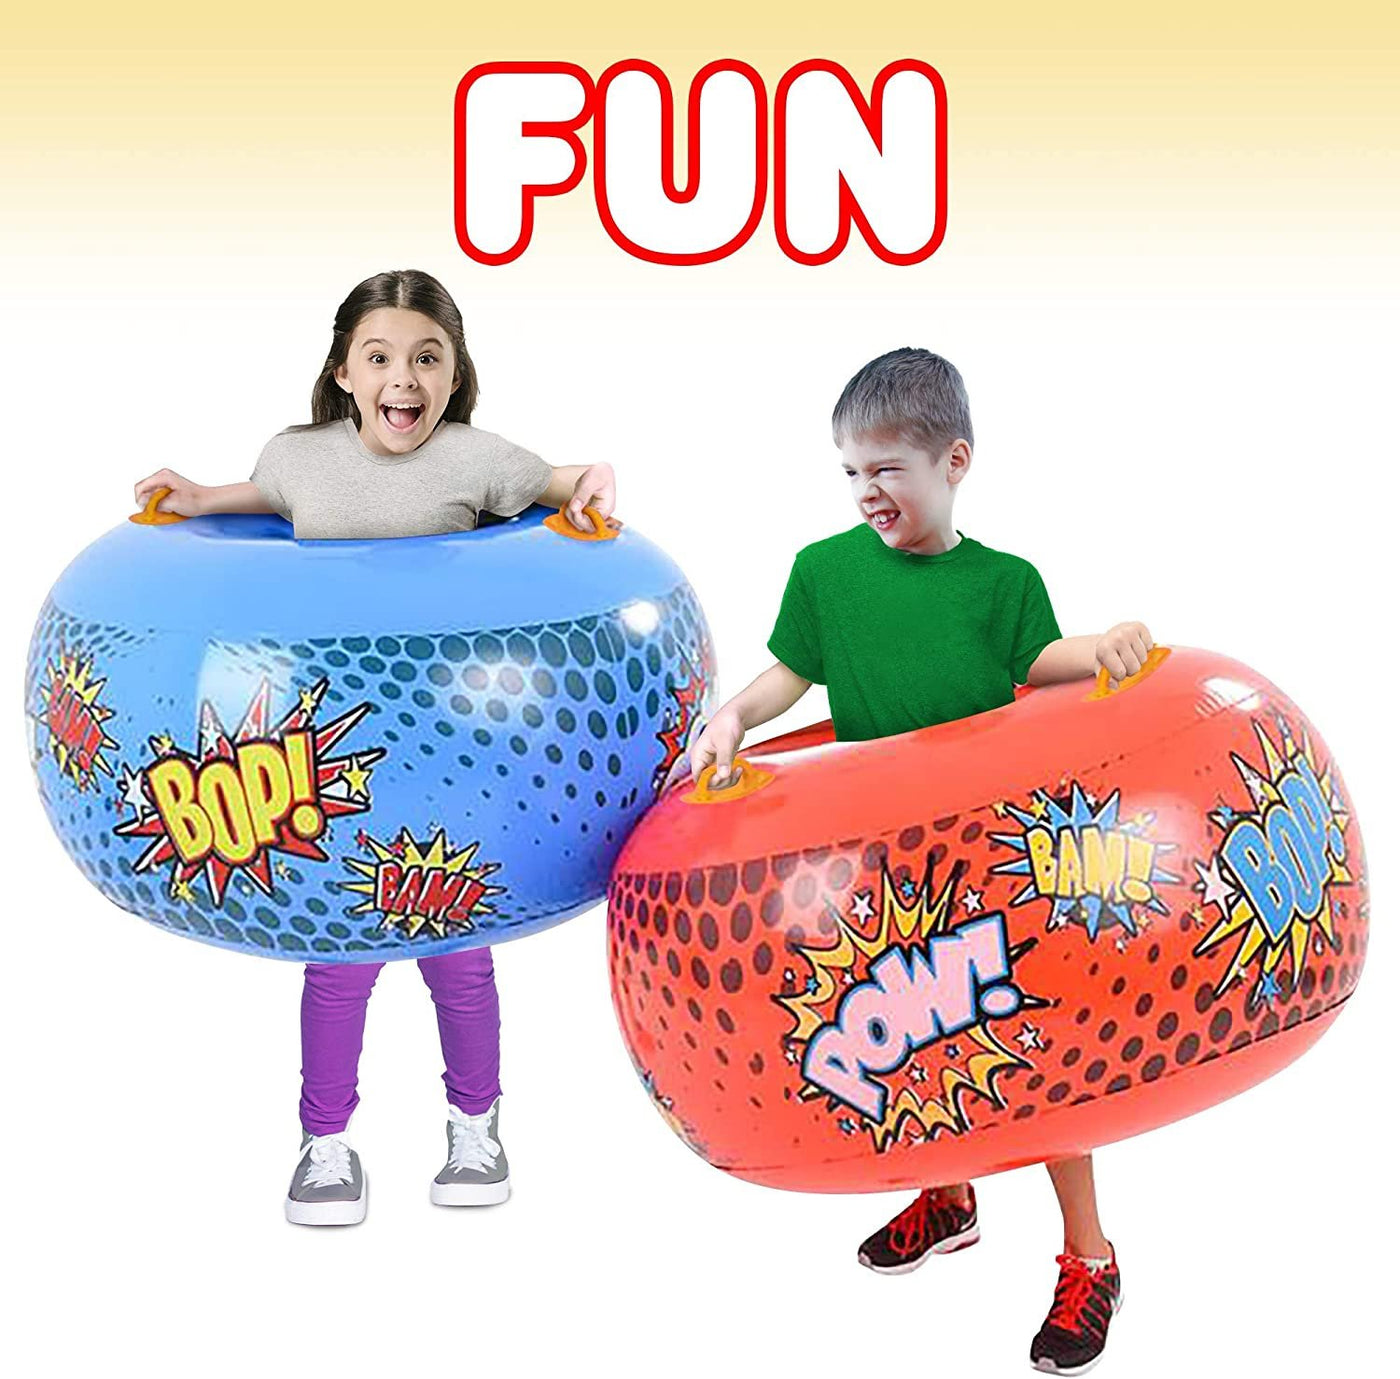 Inflatable Body Bumper Set for Kids - Pack of 2 - Colorful Bump Ball Toys with Handles - Great Summer Game, Fun Birthday Party Activity, Gift Idea for Boys and Girls - Red and Blue